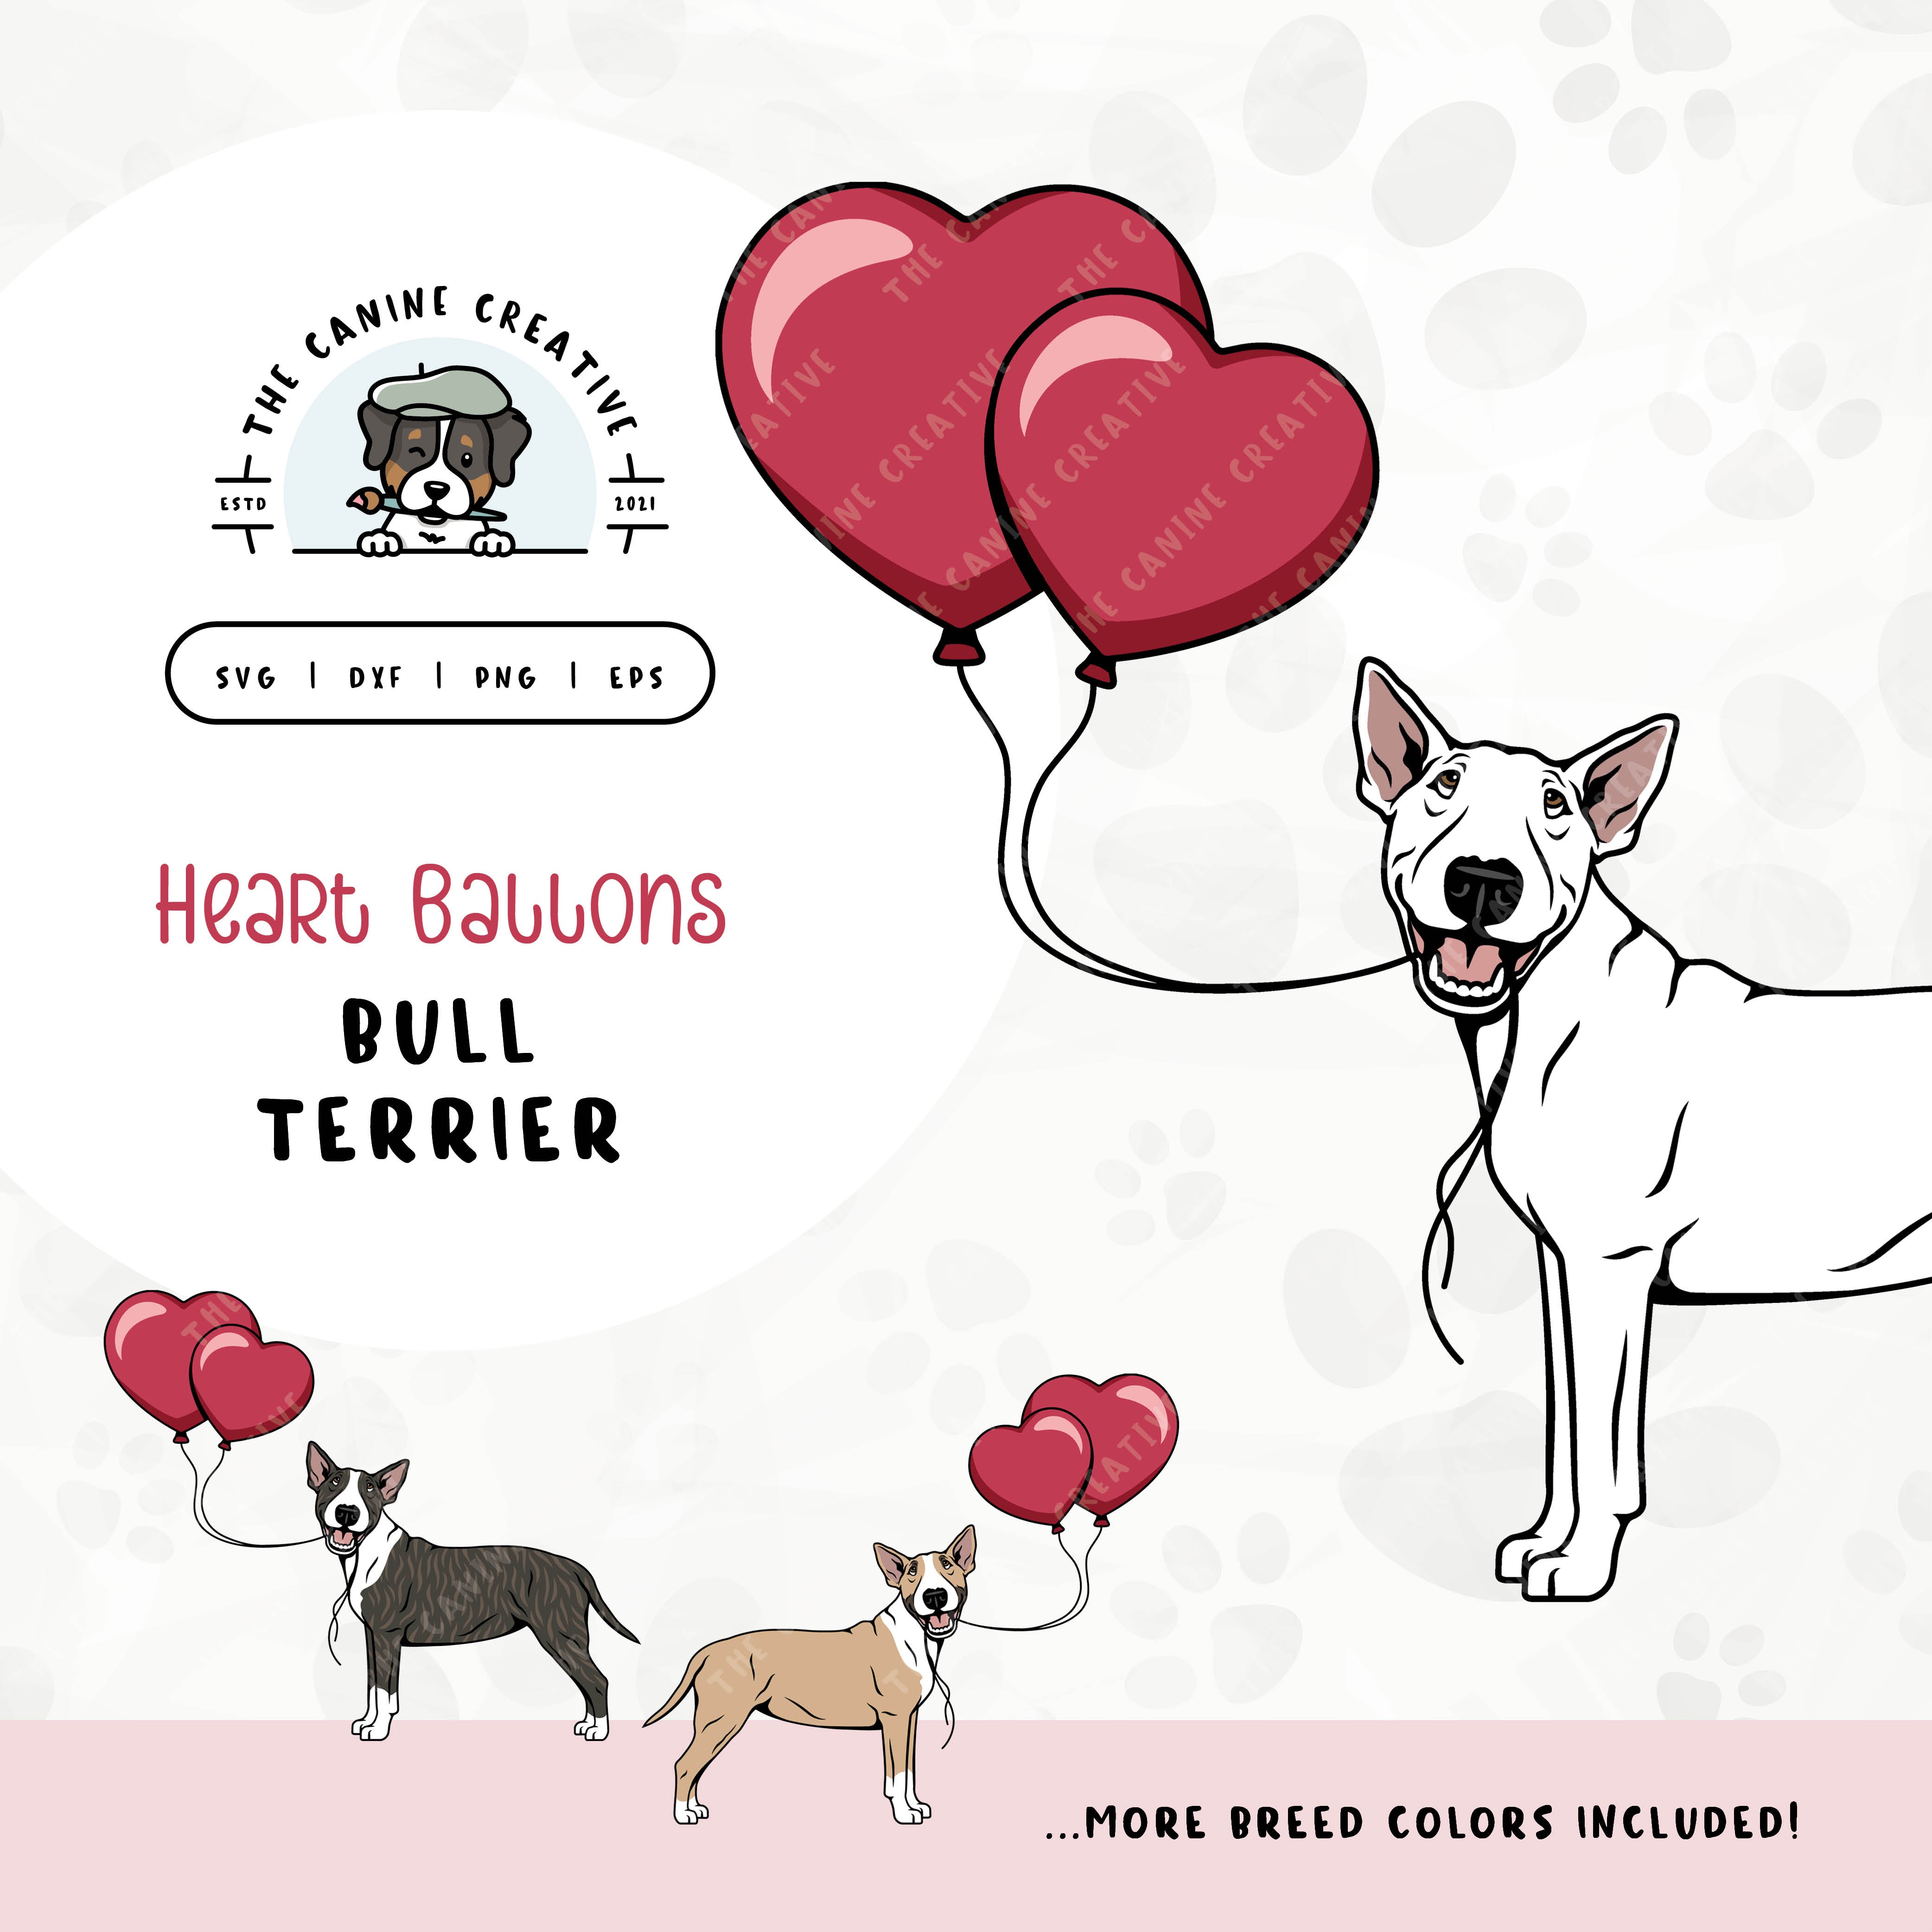 This charming illustration of a Bull Terrier features a dog holding heart-shaped balloons. File formats include: SVG, DXF, PNG, and EPS.